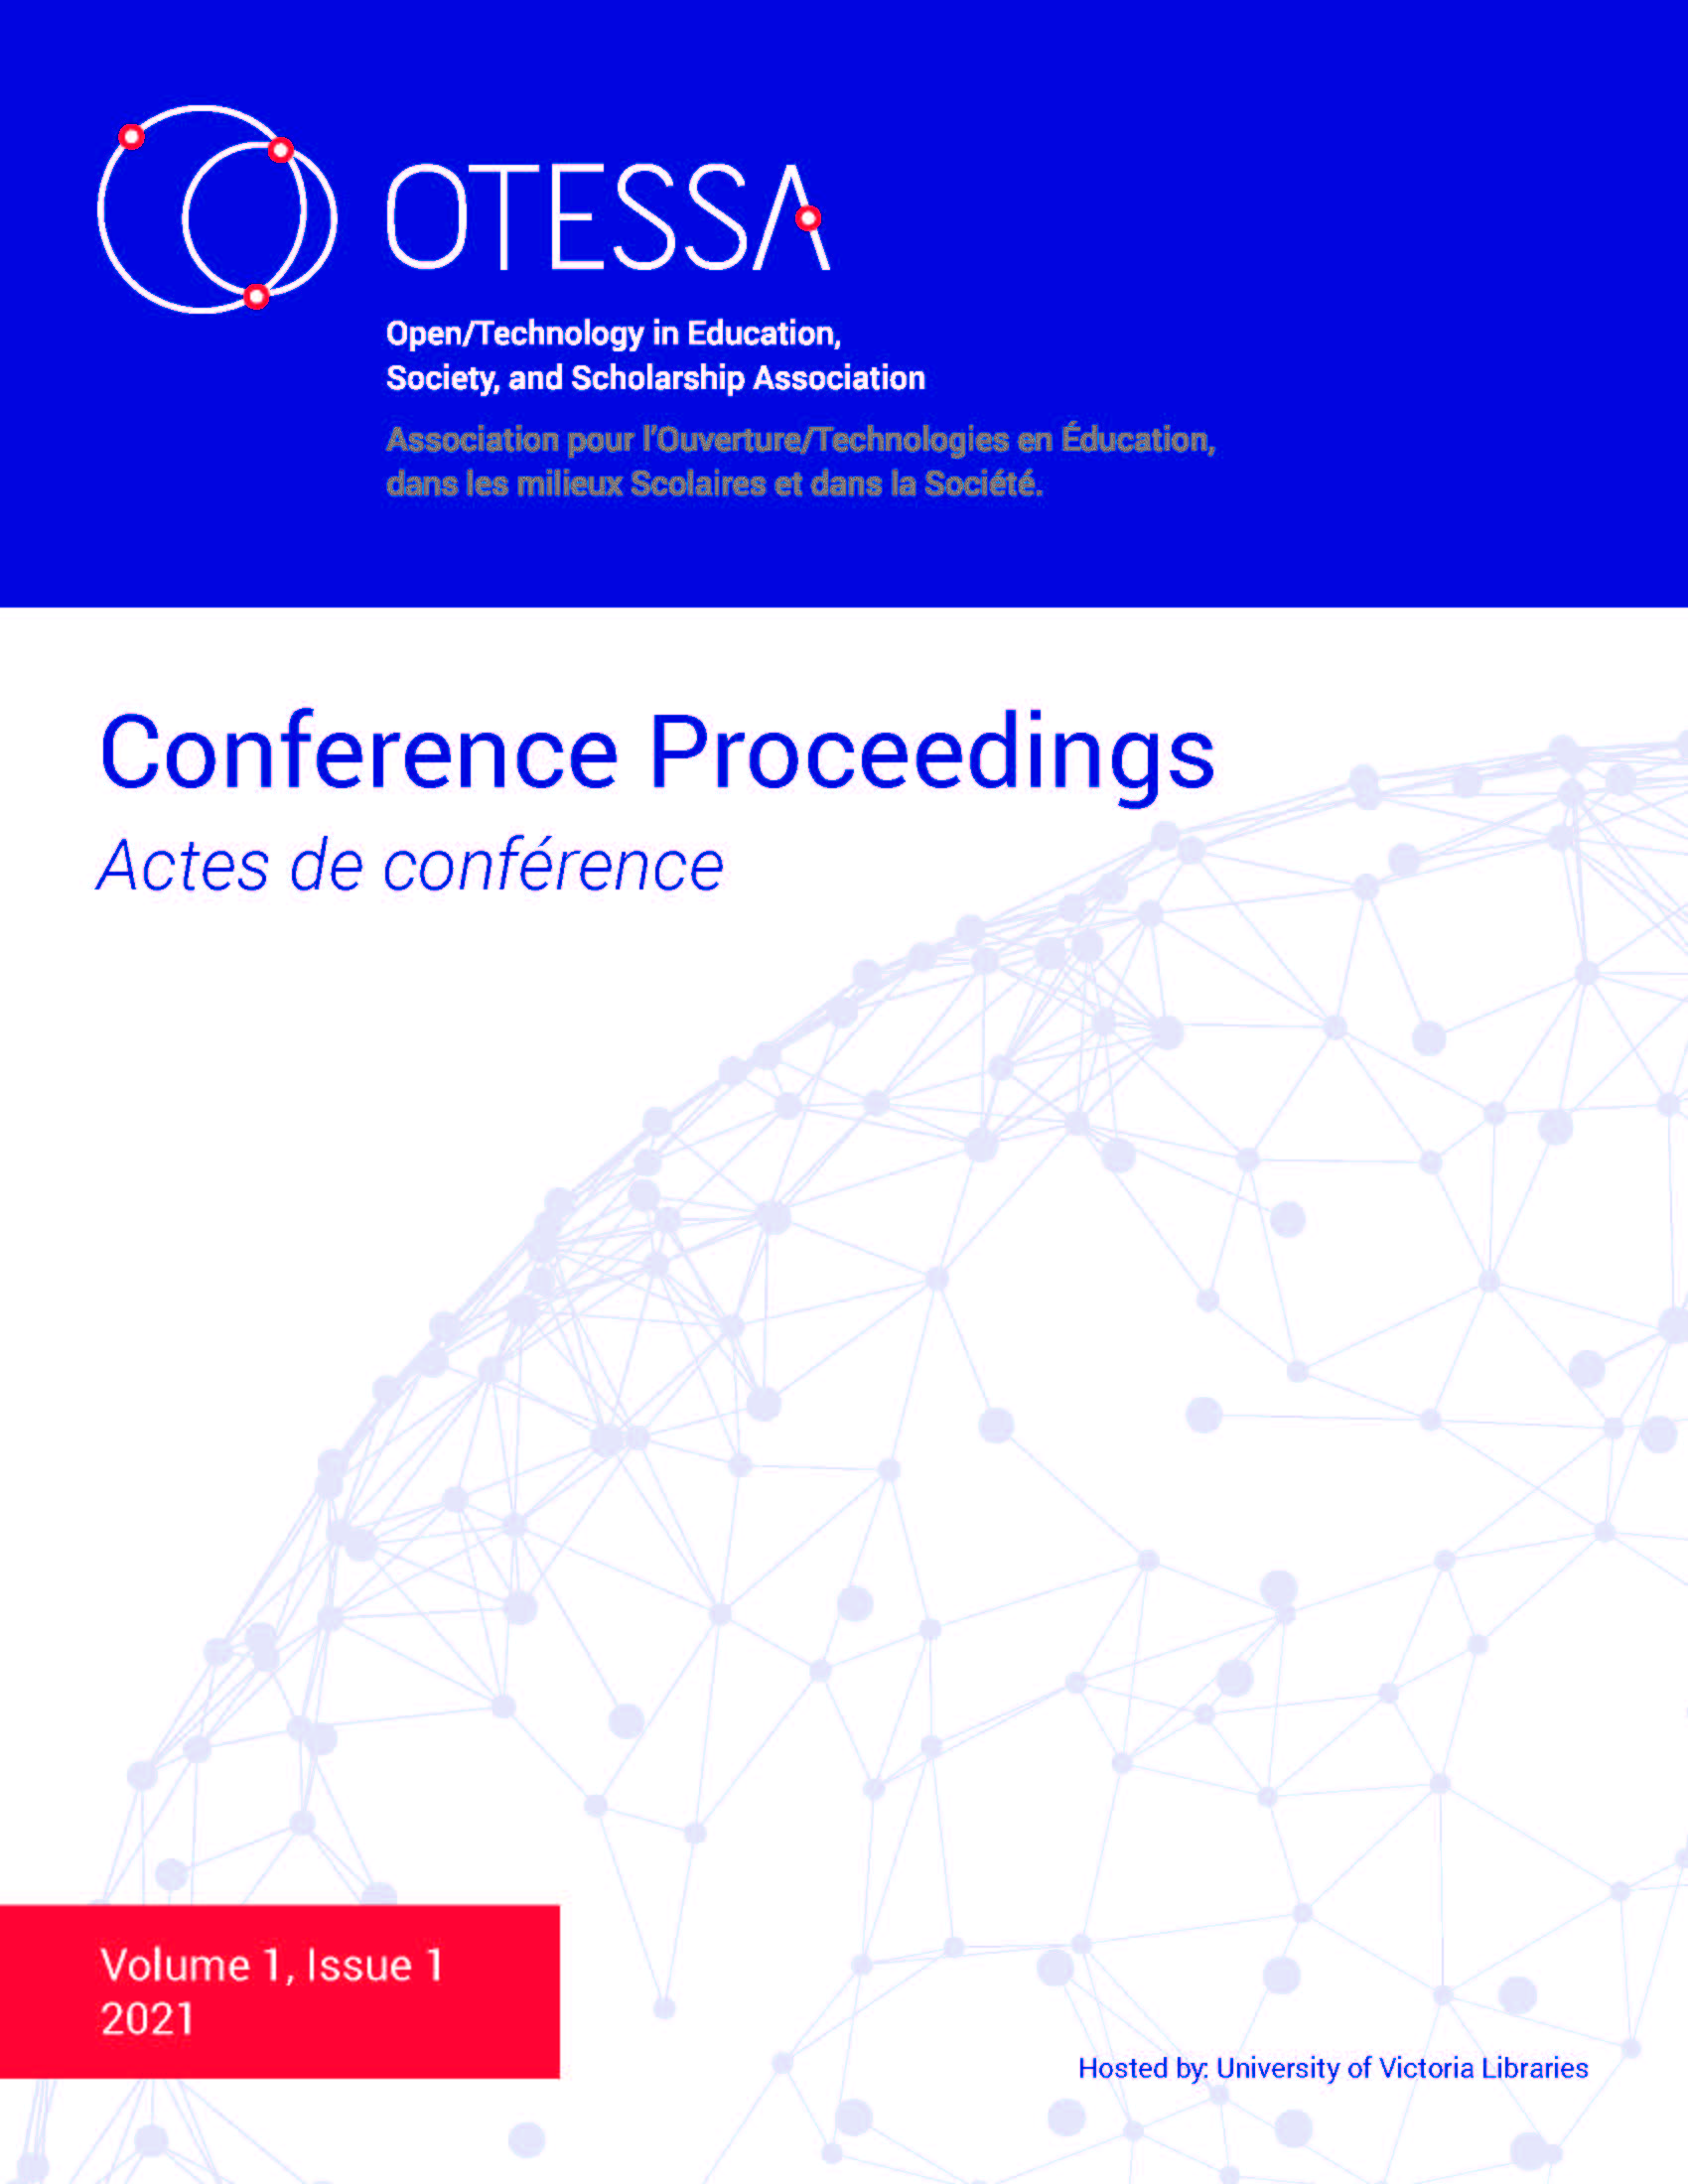 OTESSA Conference Proceedings Volume 1 Issue 1 2021 Hosted by University of Victoria Libraries